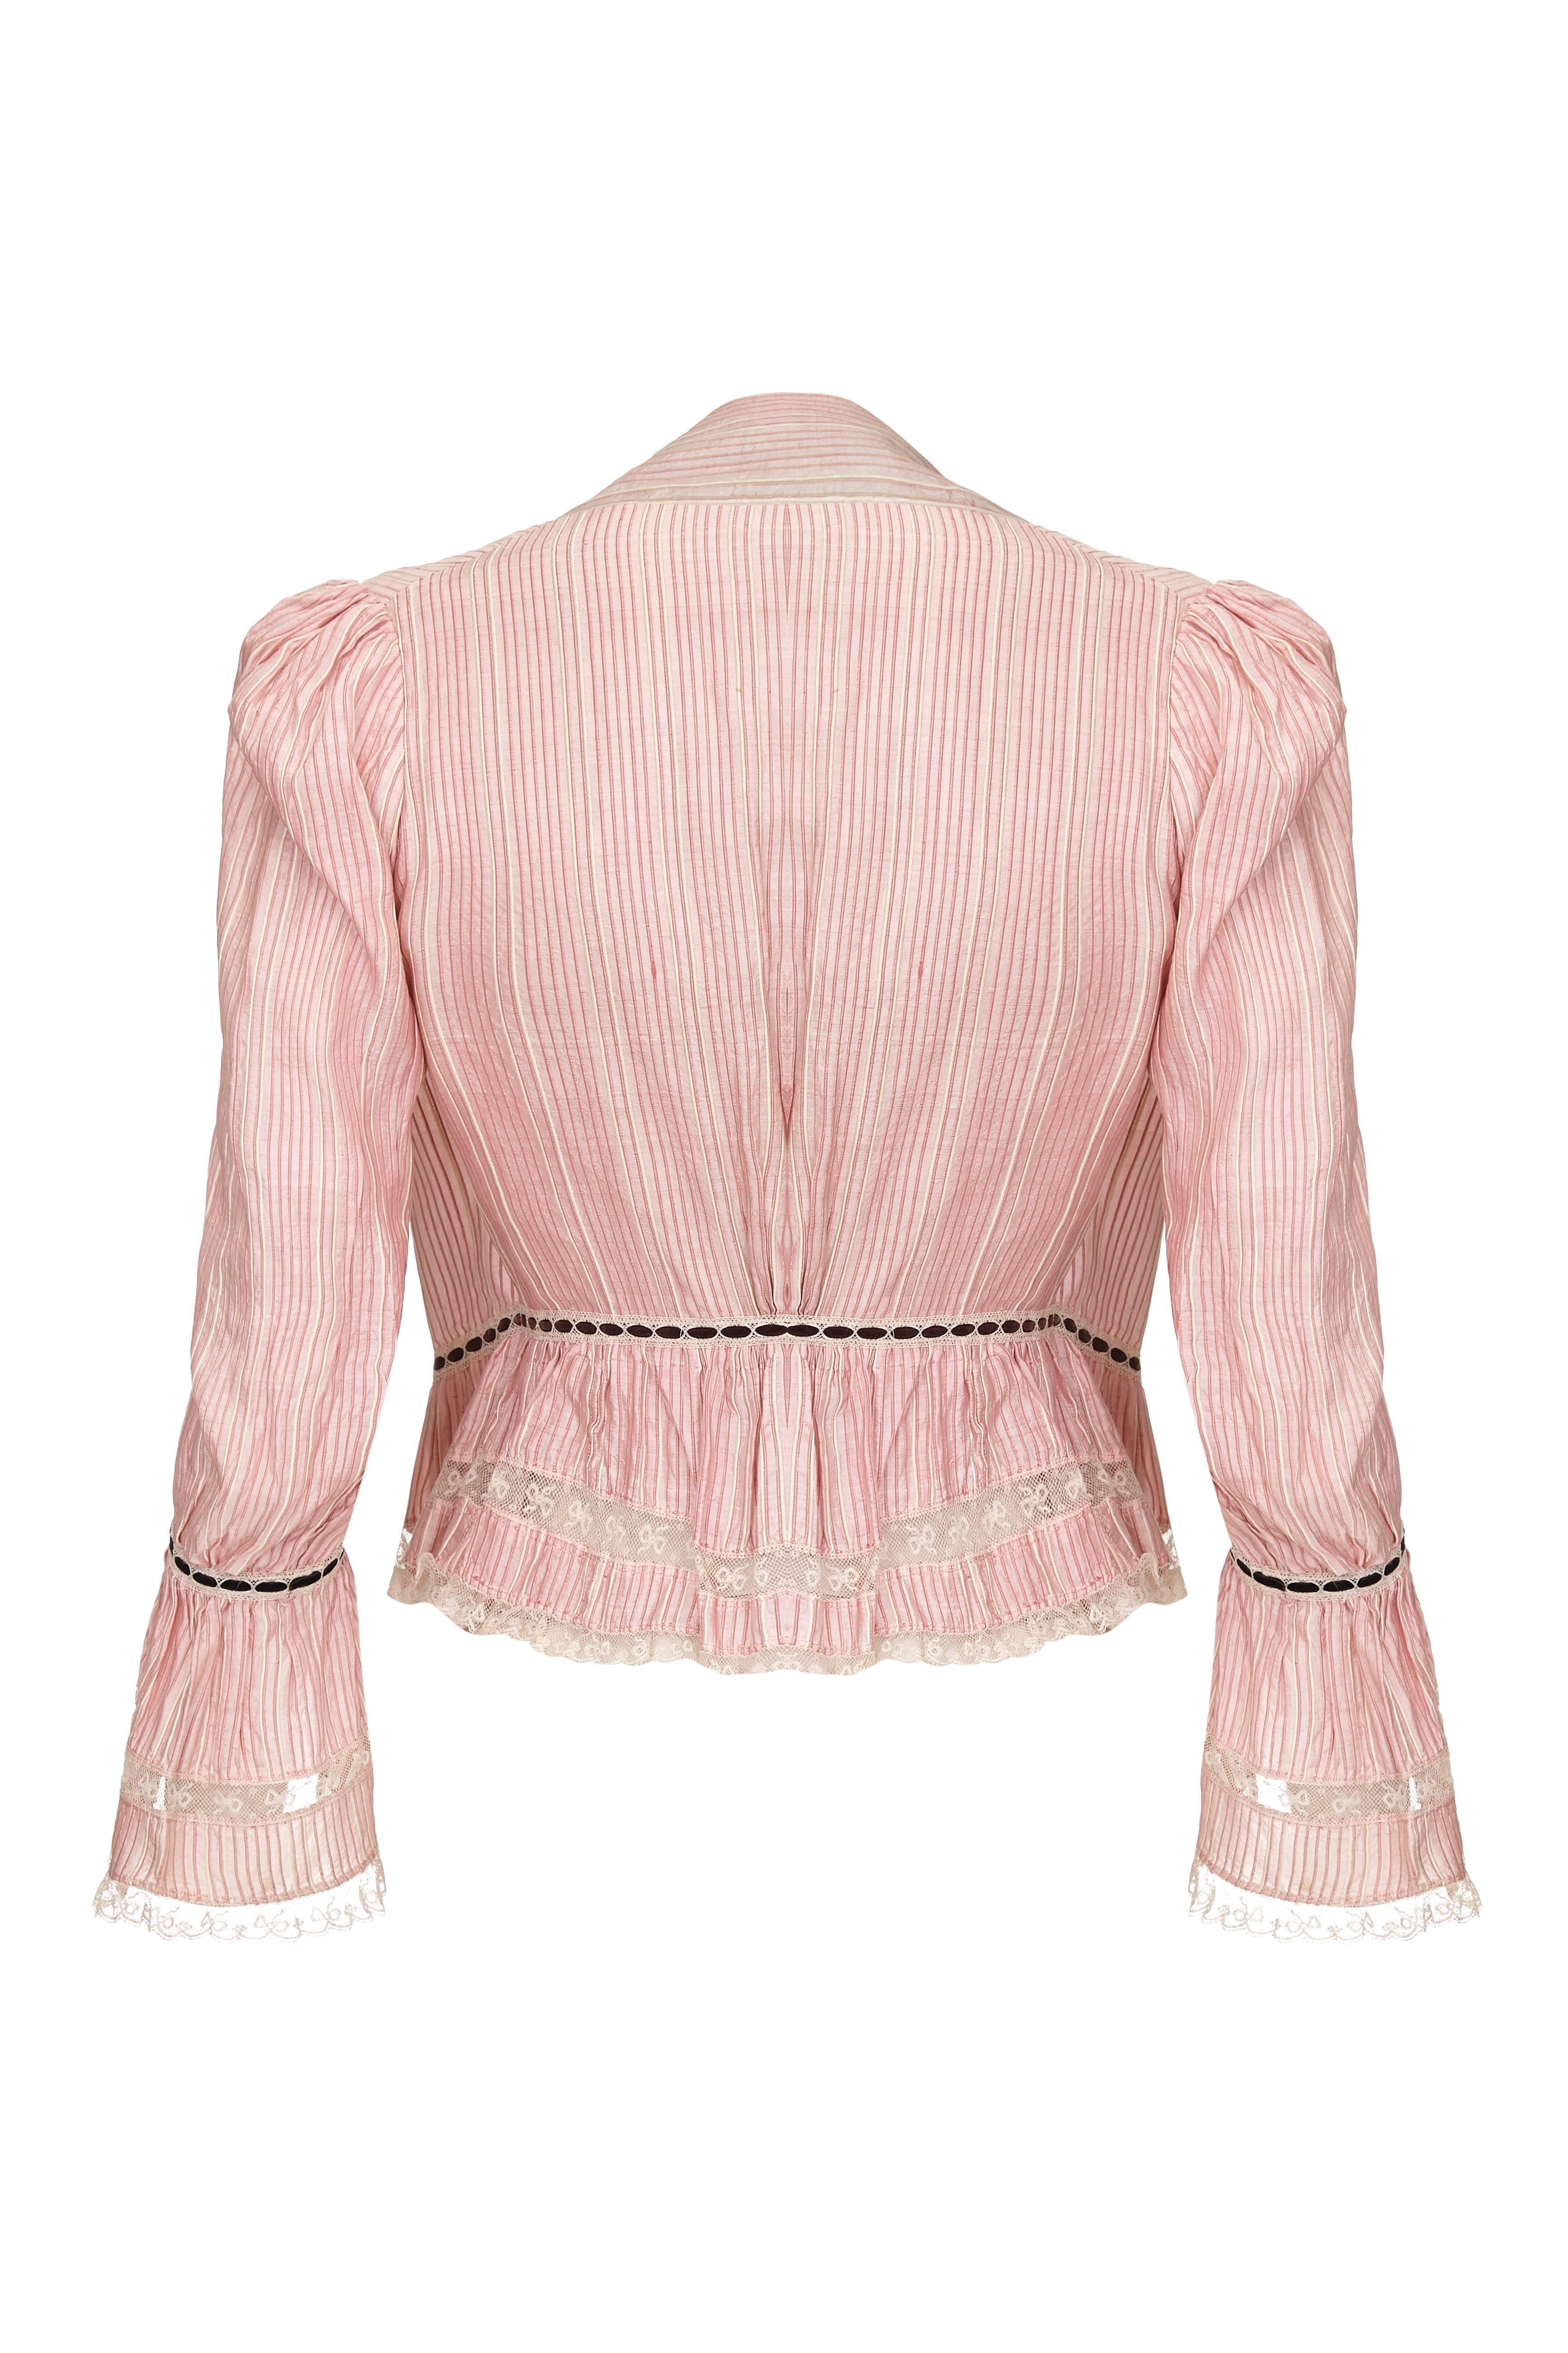 Wonderful and entirely original, as found, antique Victorian Civil War era pink silk stripe flounced sleeve bodice dating to around 1860. The corsage has stripes of both white and a more peachy coloured pink silk.  With a high neck collar the bodice